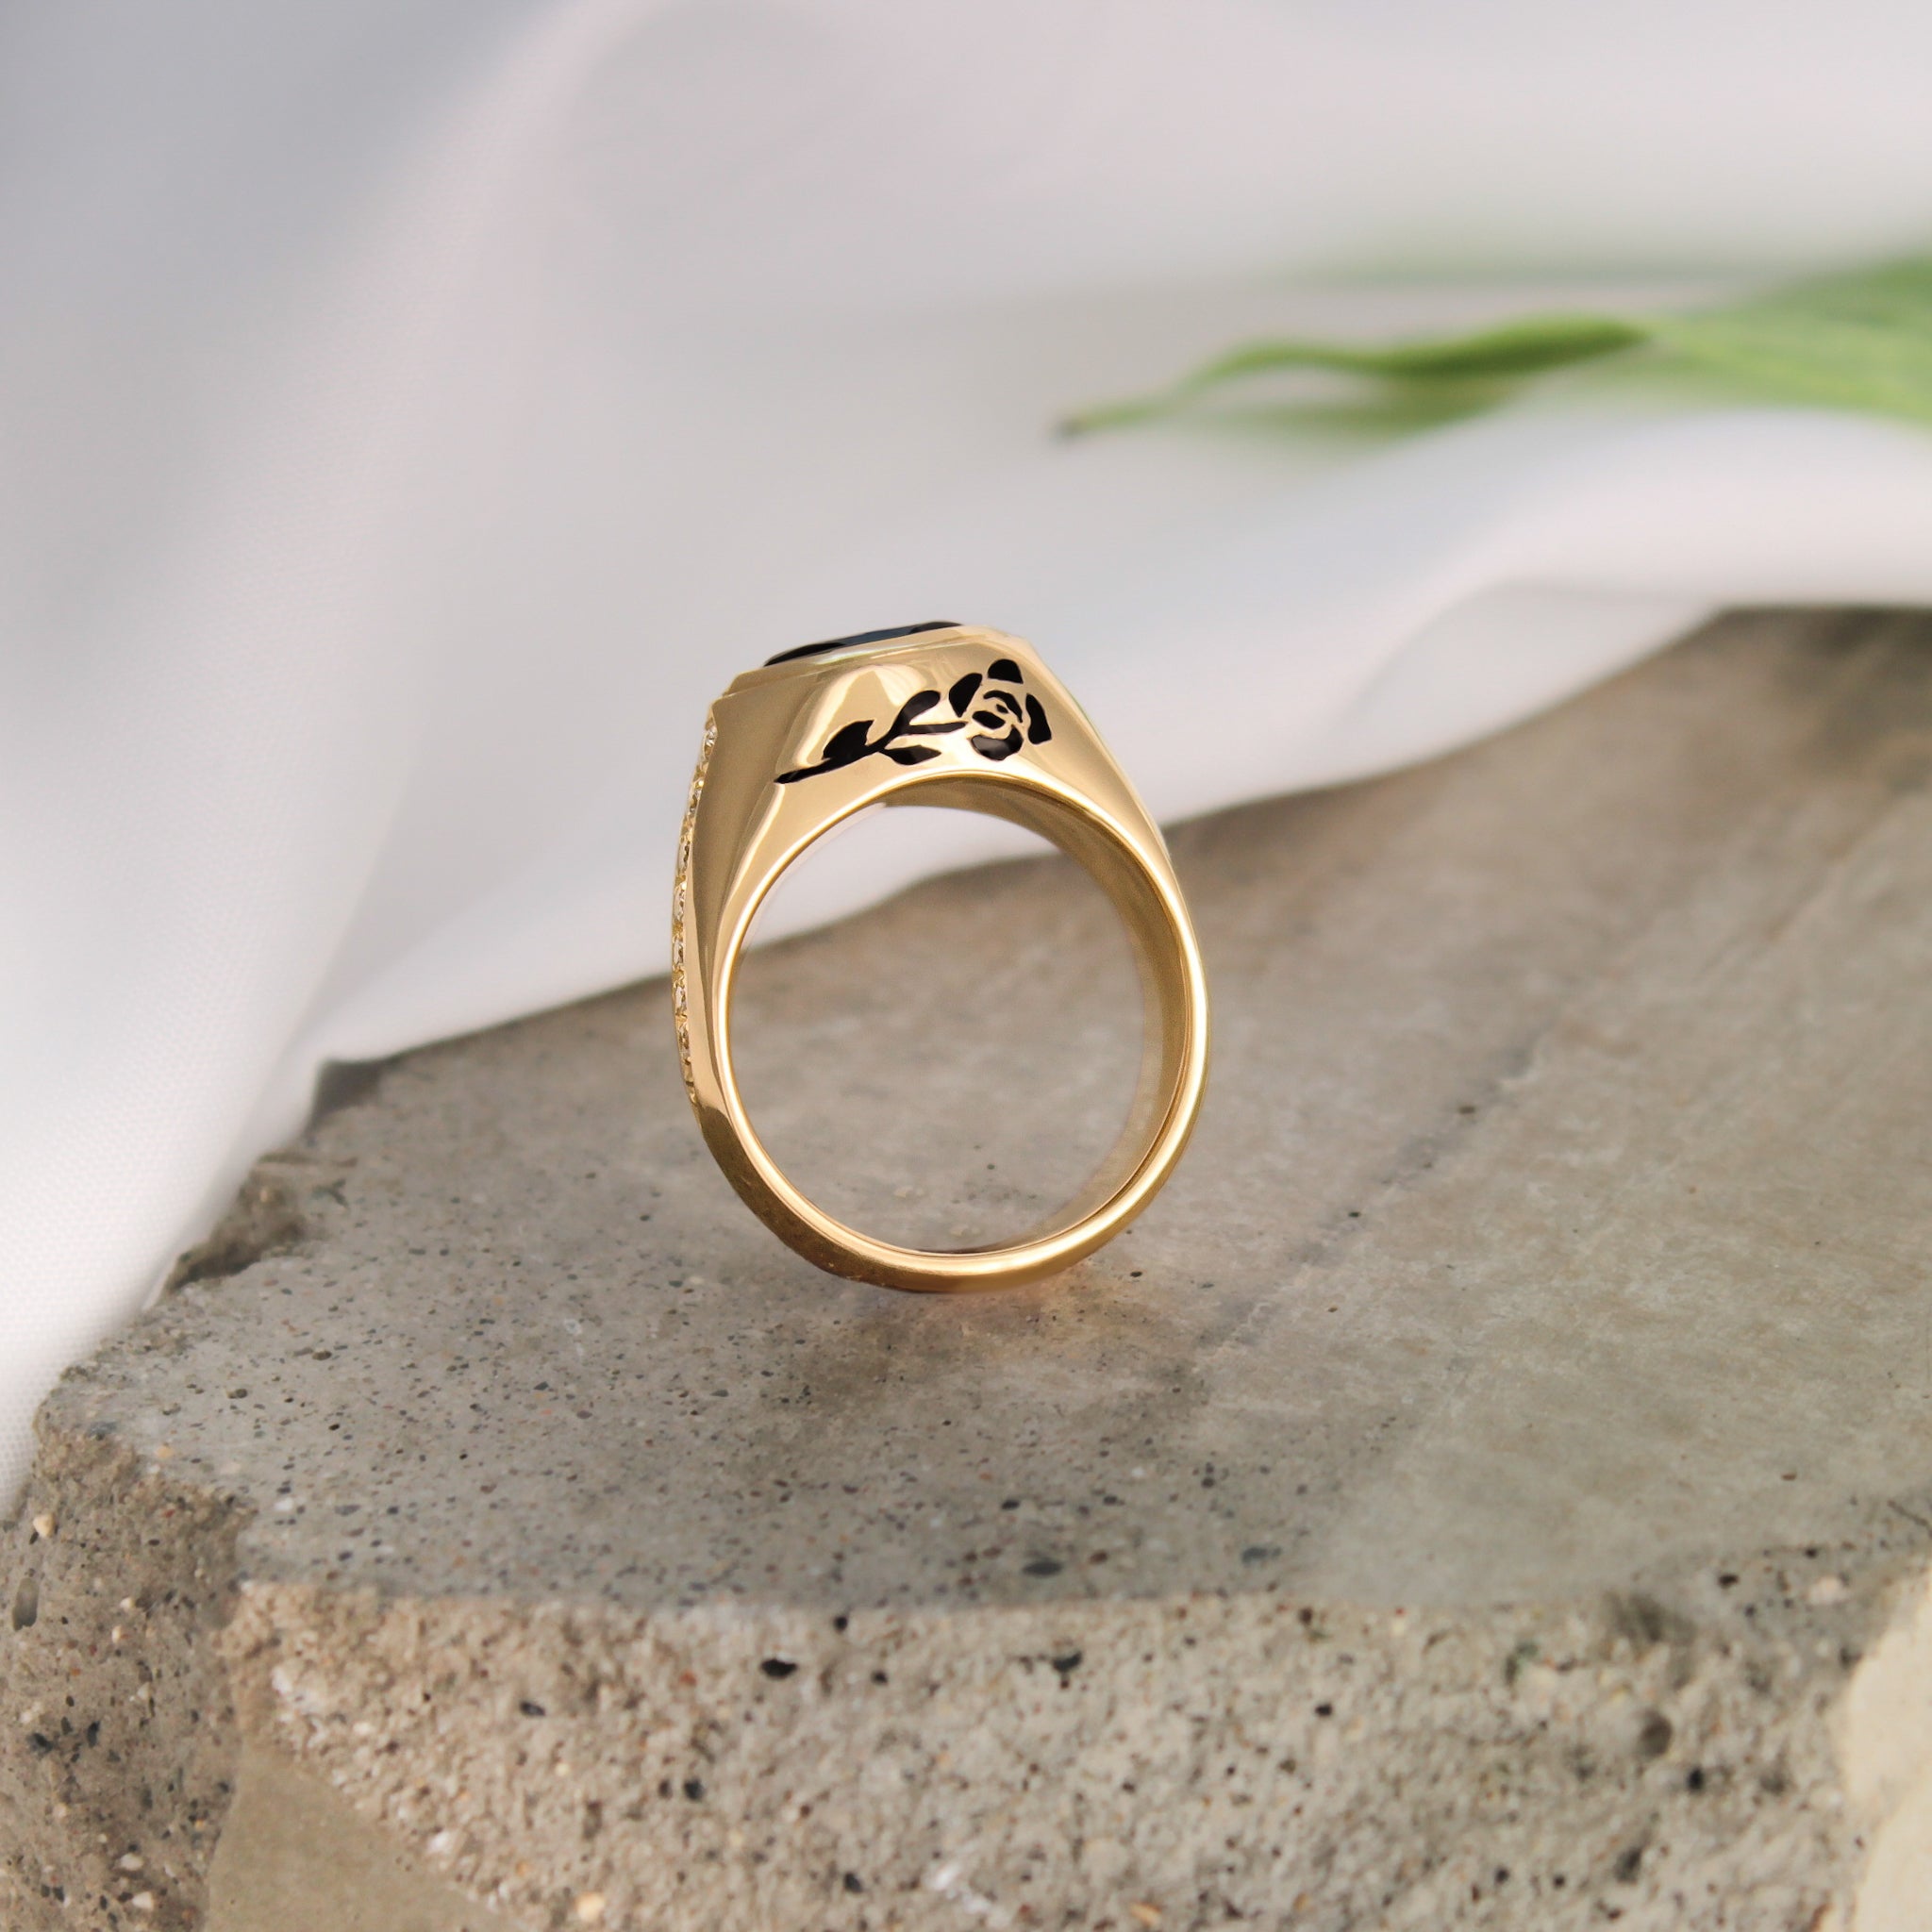 14k Yellow Gold ring with black enamel rose and accent diamonds."